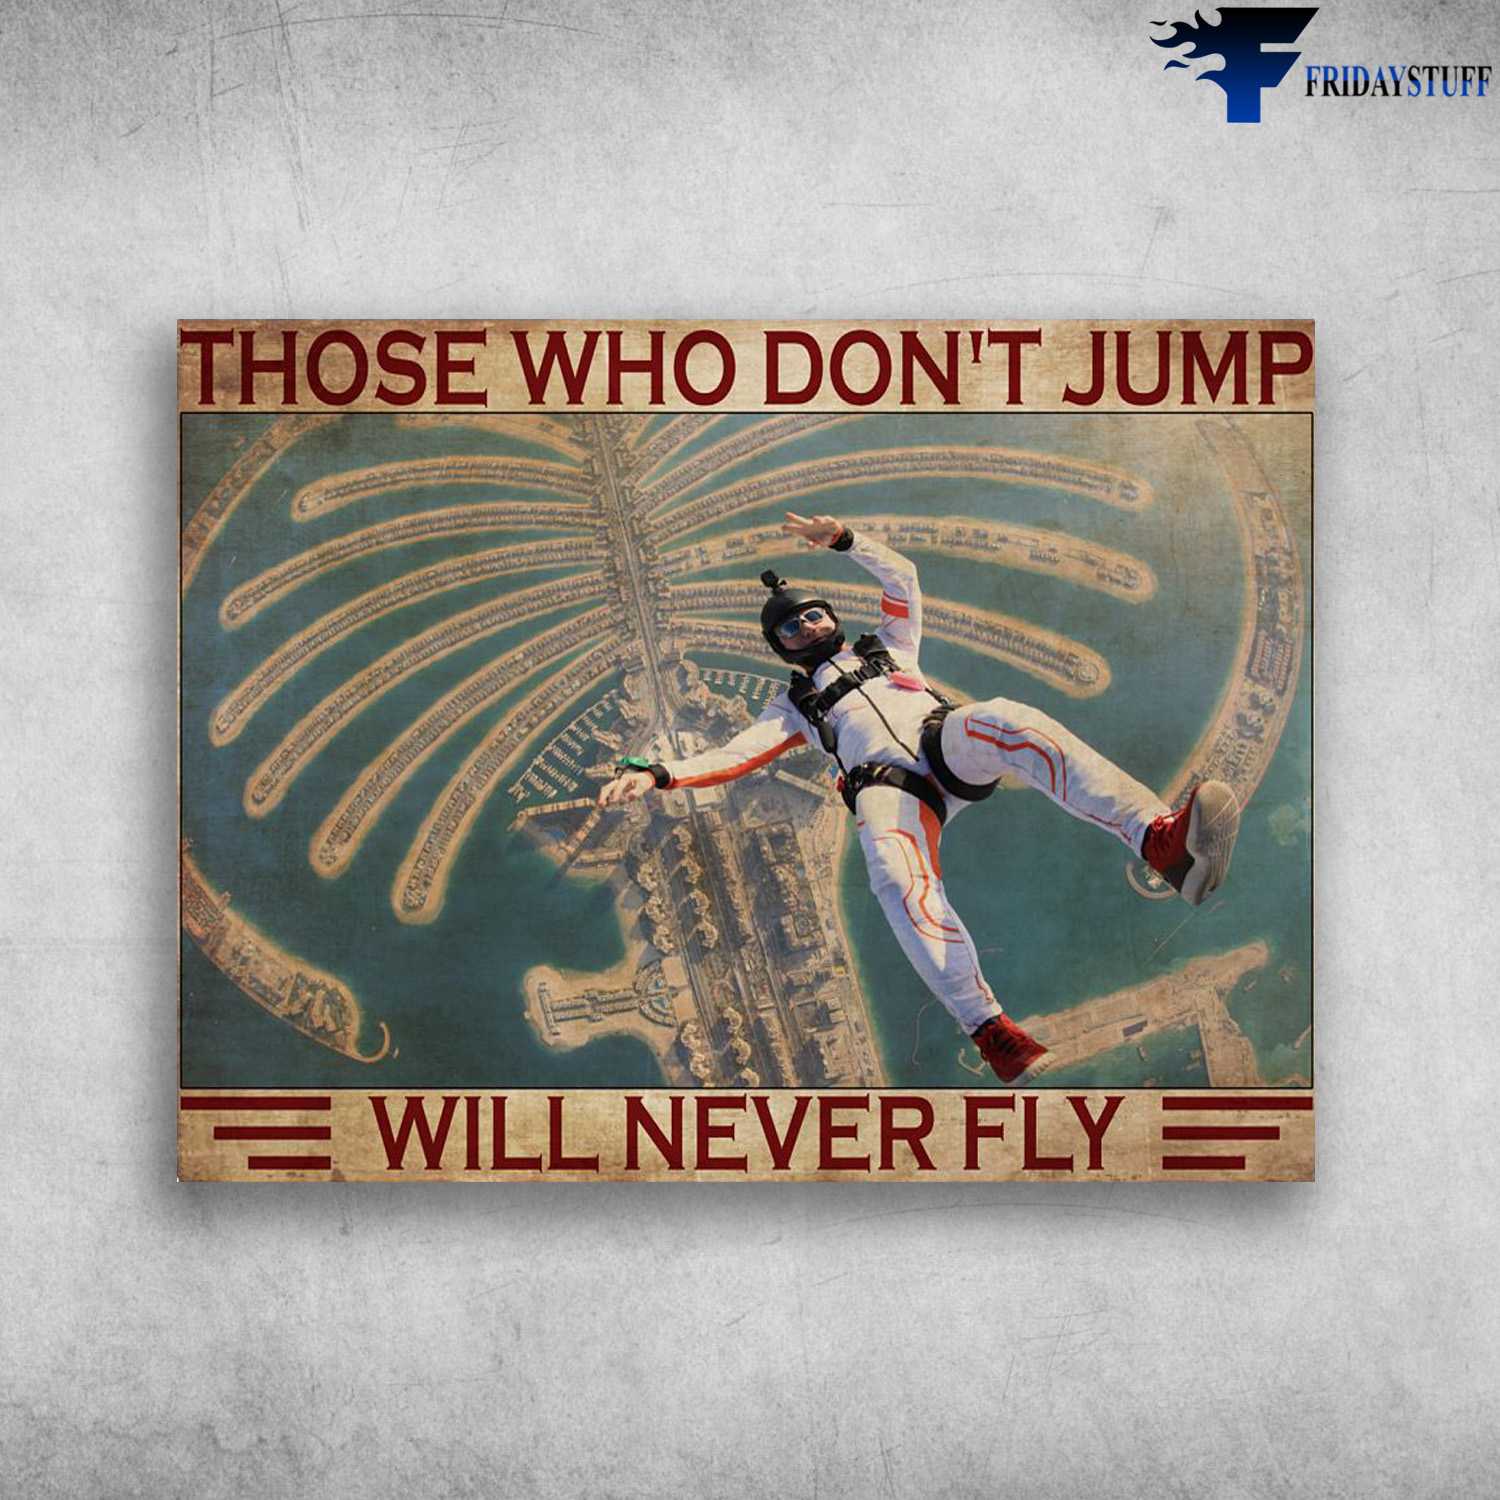 Skydiving Man, Skydiving Lover, Those Who Don't Jump, Will Never Fly